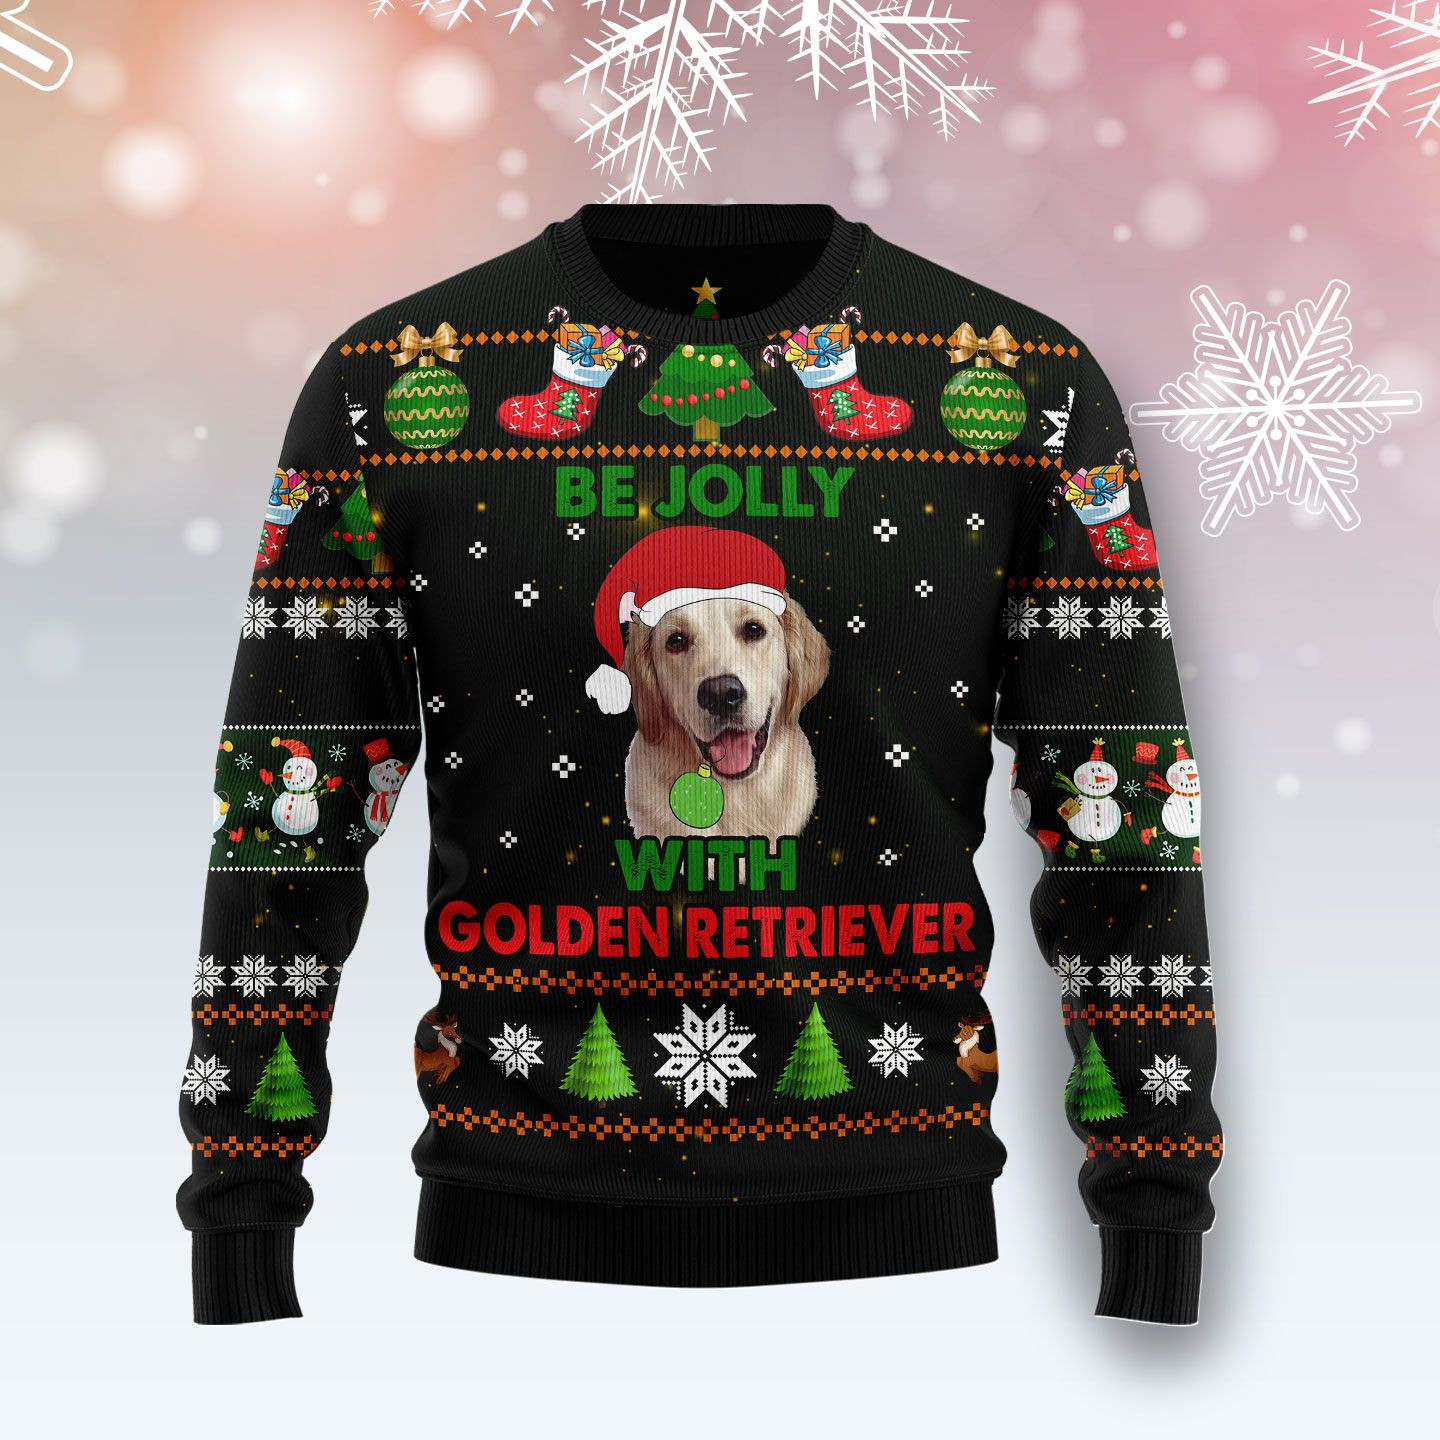 Golden Retriever Be Jolly Ugly Christmas Sweater Ugly Sweater For Men Women